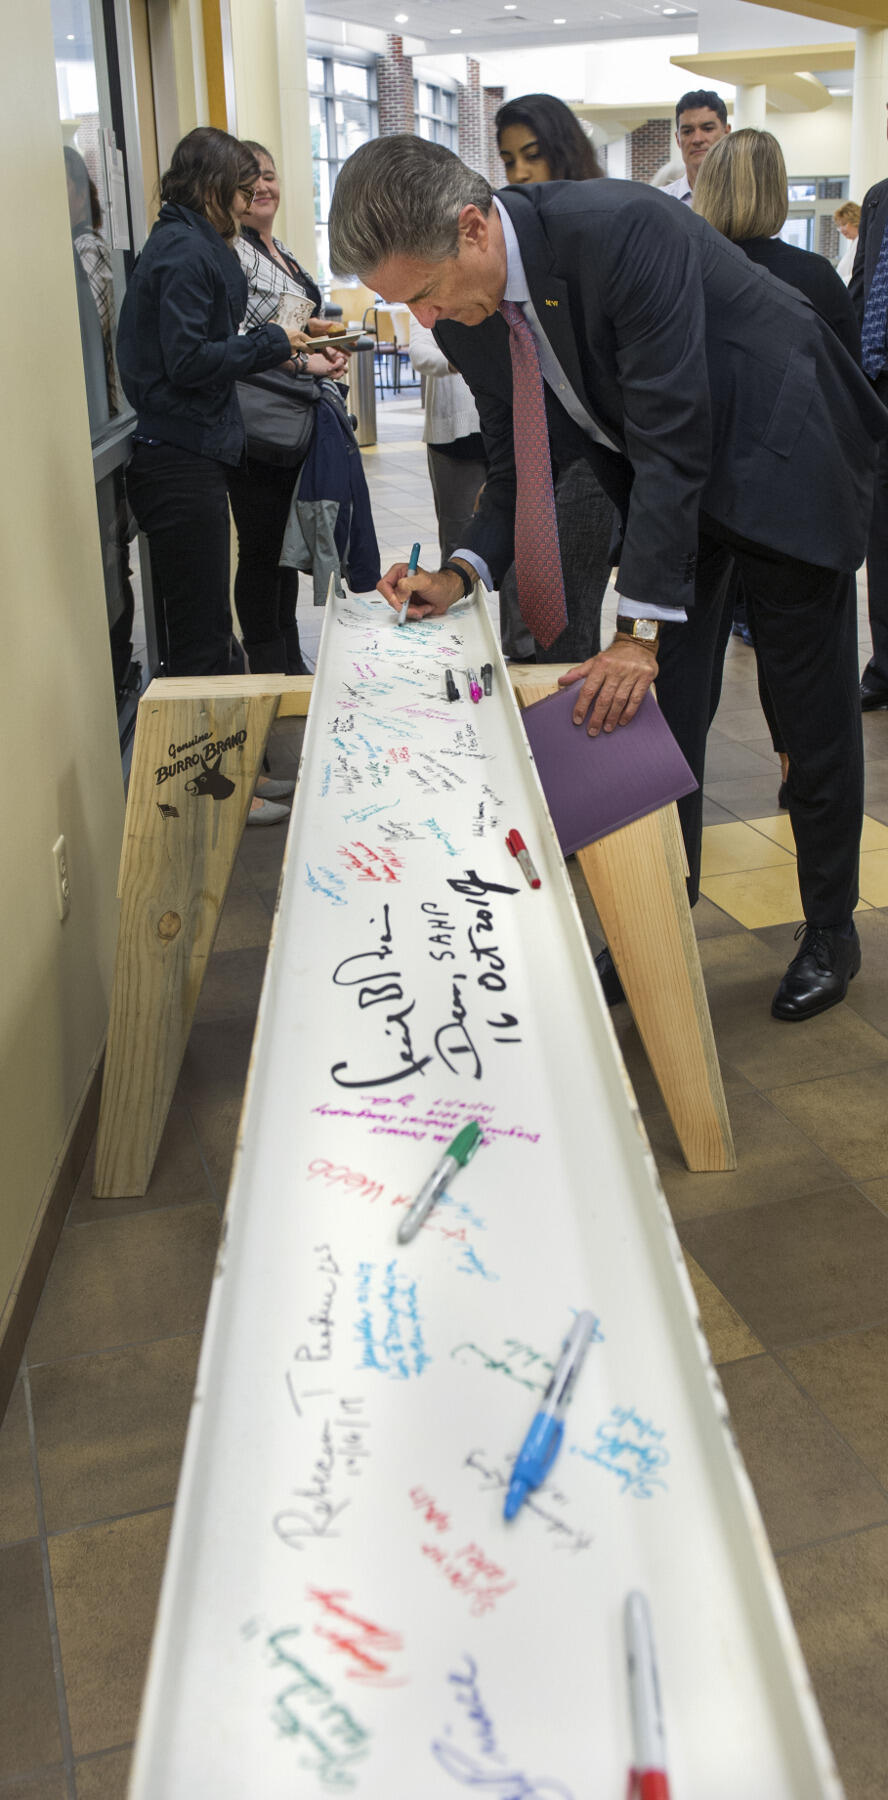 MCV Foundation board of trustees chair Harry Thalhimer signs the School of Allied Health Professions beam on Monday morning. "It is unbelievable how quickly this building has gone up," Thalhimer said. "It marks the beginning of the transformation of this outstanding campus."